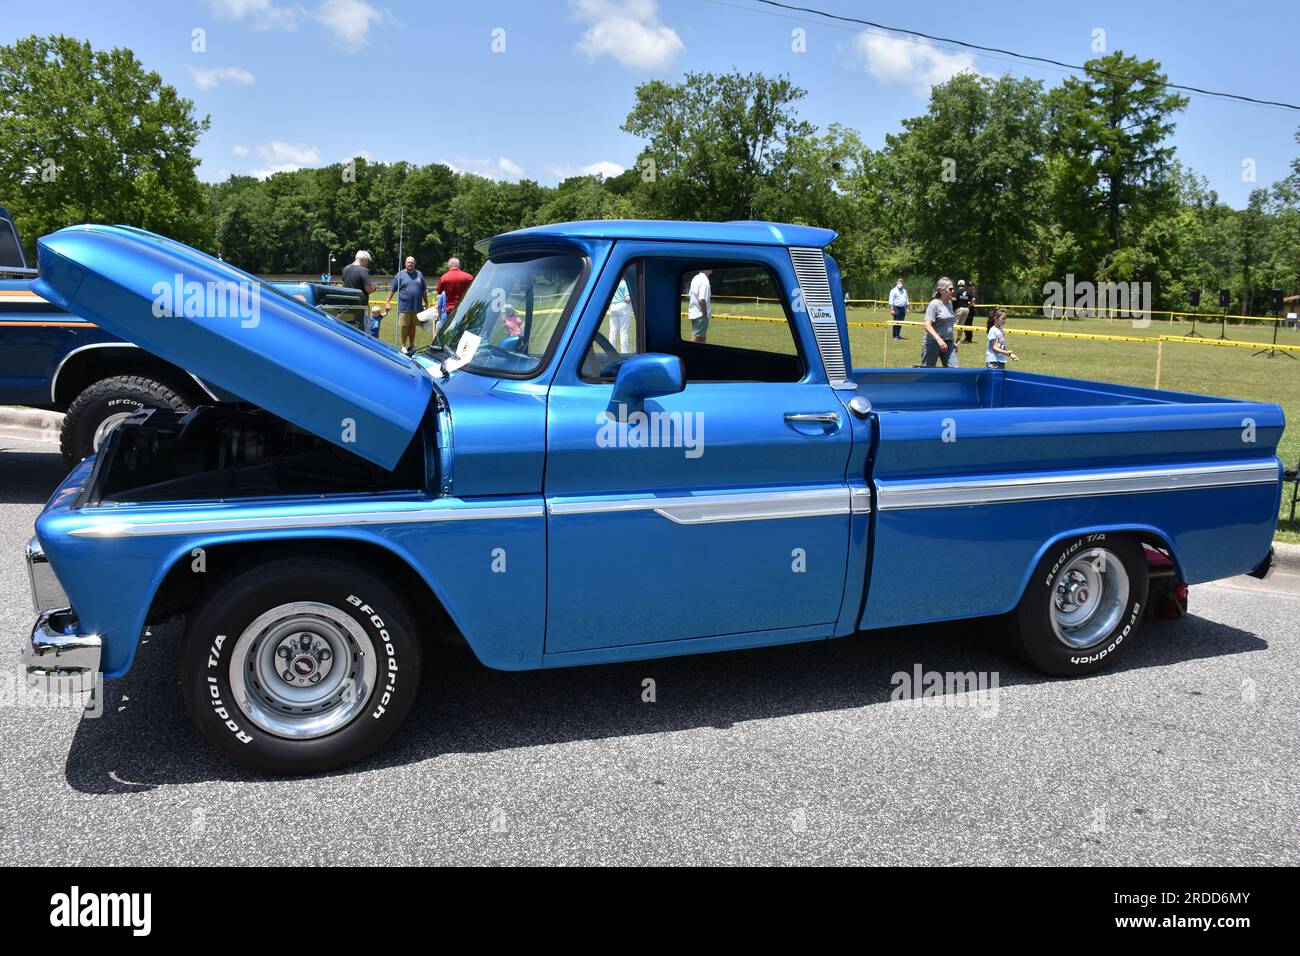 A 1960s Chevrolet Pickup Truck on display at a car show. Stock Photo